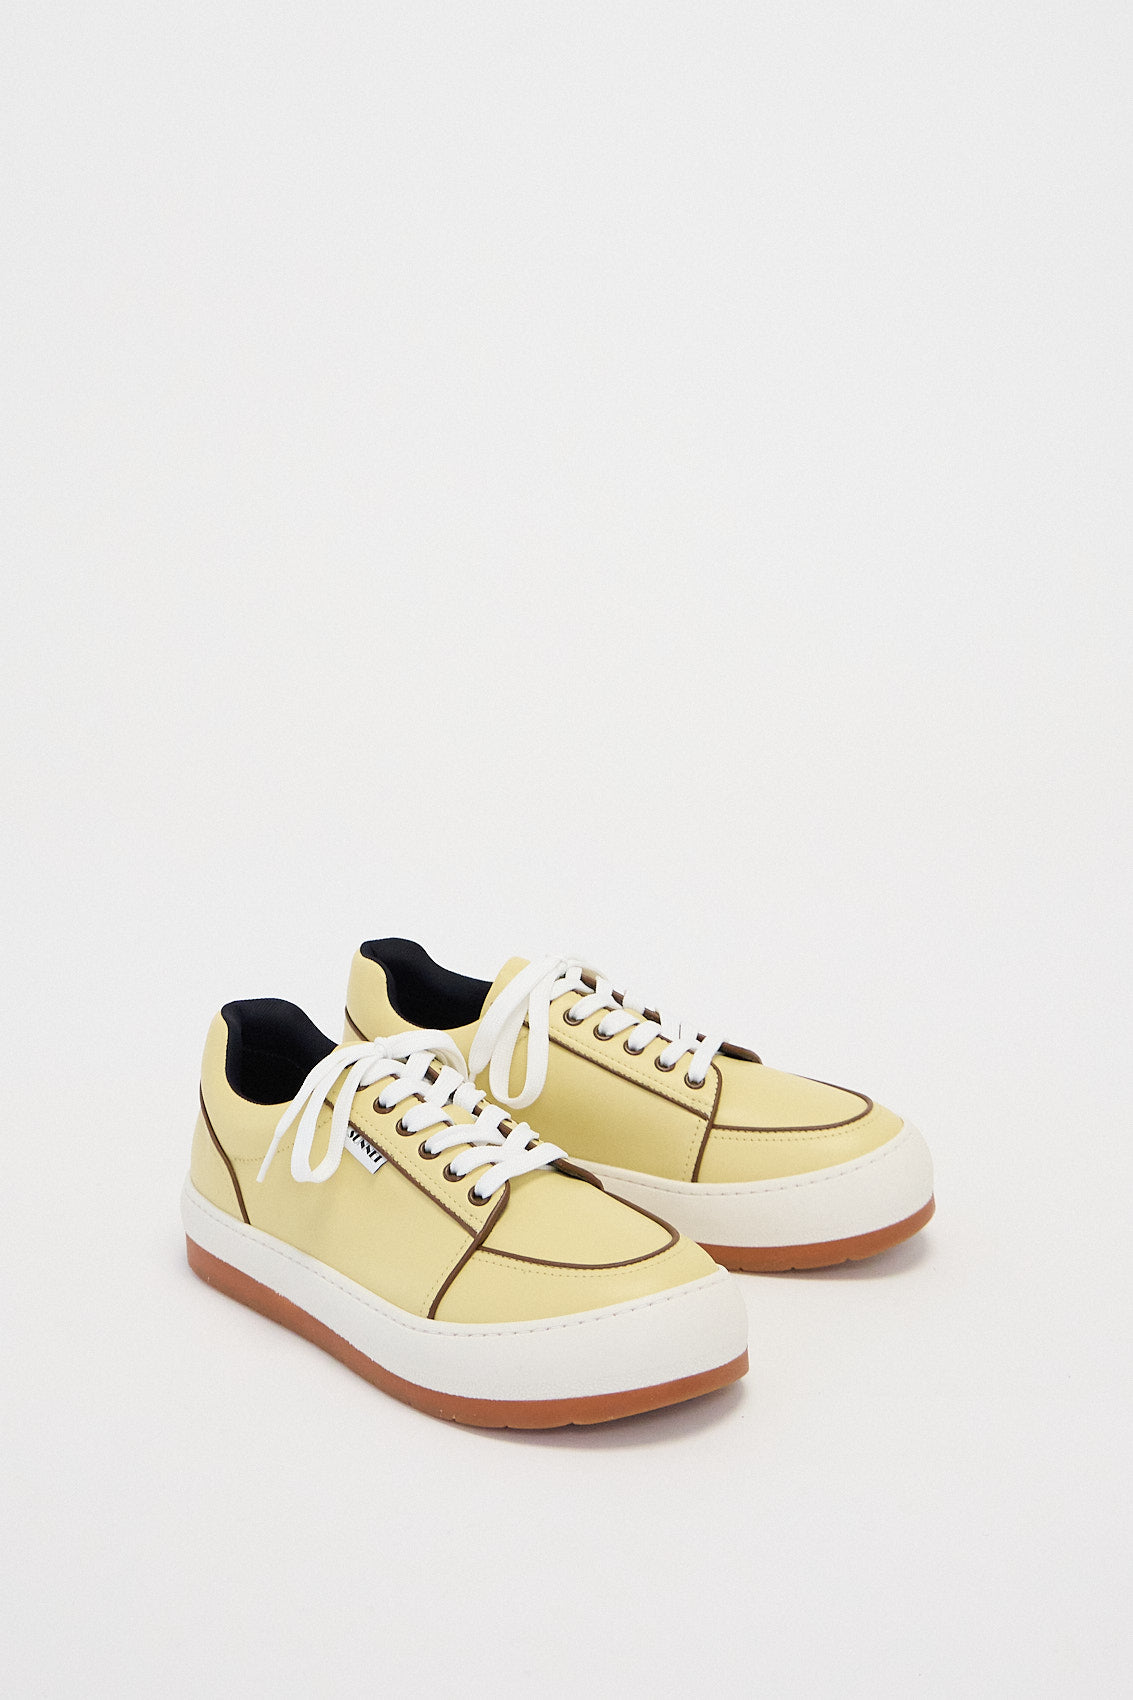 DREAMY SHOES / leather / cream